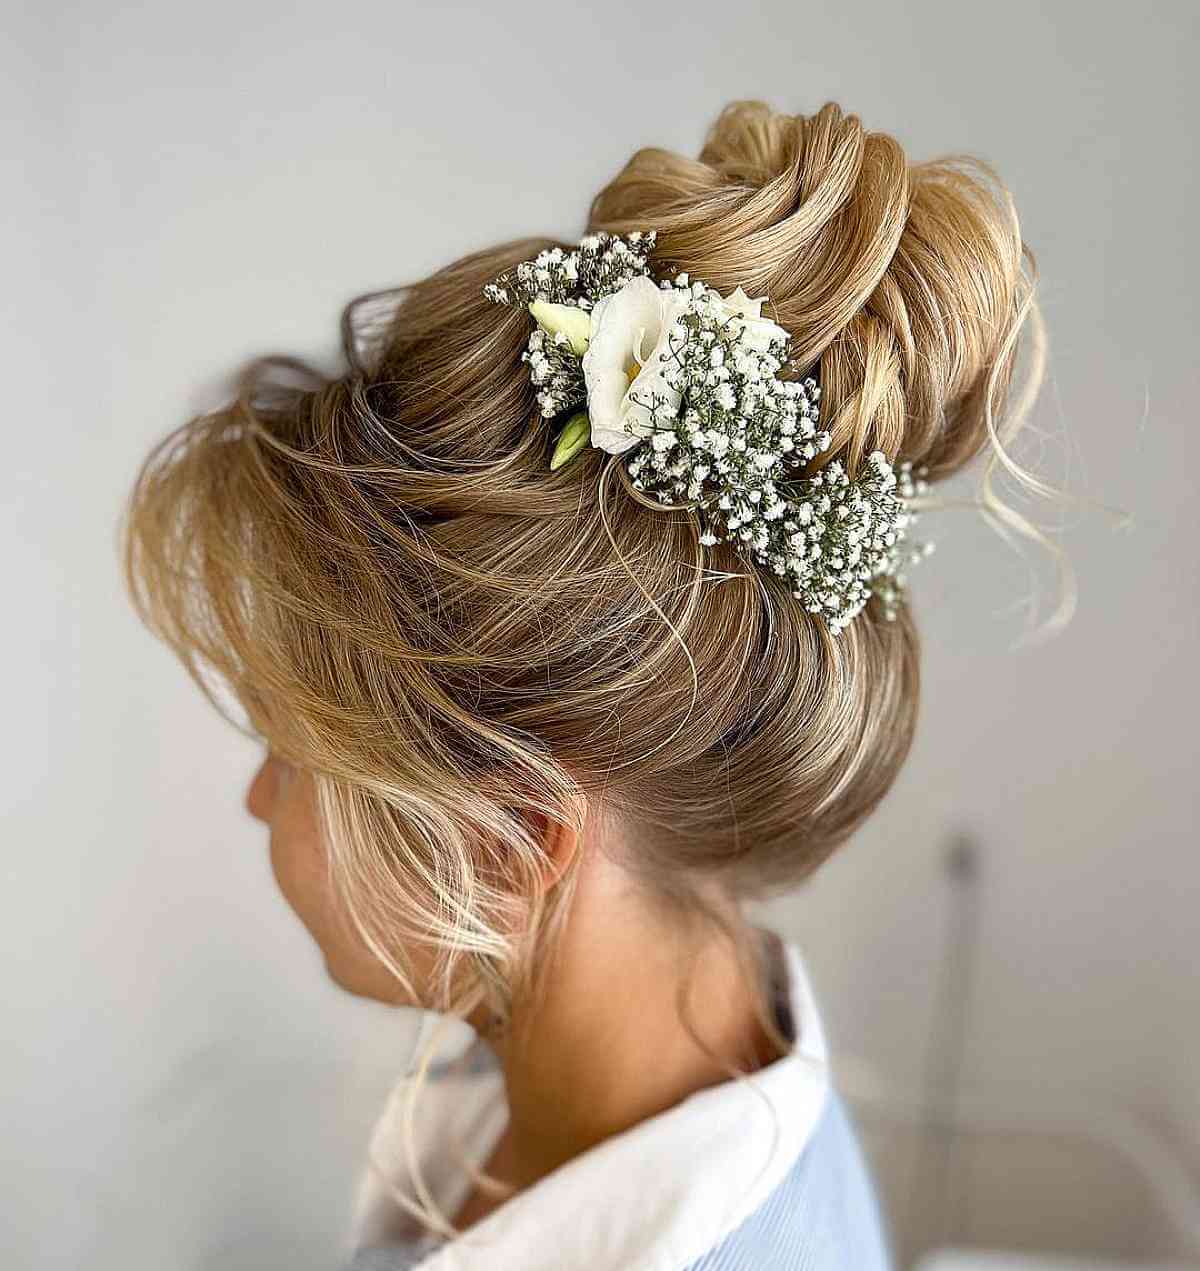 Formal Bun Updo with Hair Accessories